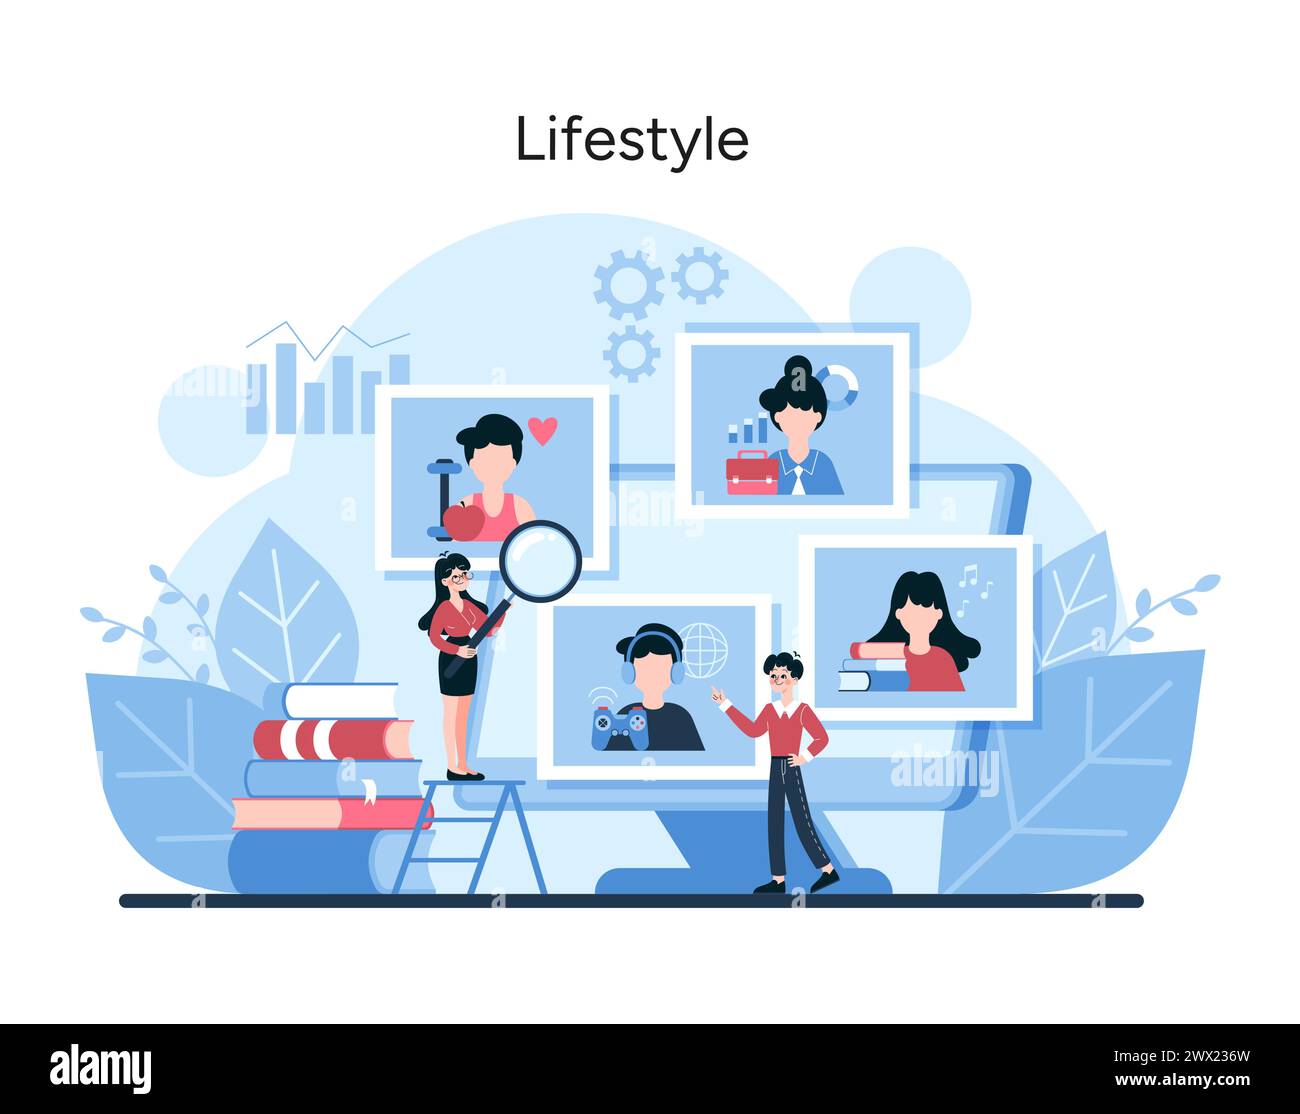 Lifestyle Segmentation analysis. Illustration captures tailored marketing through diverse personal interests and activities. Vector illustration Stock Vector